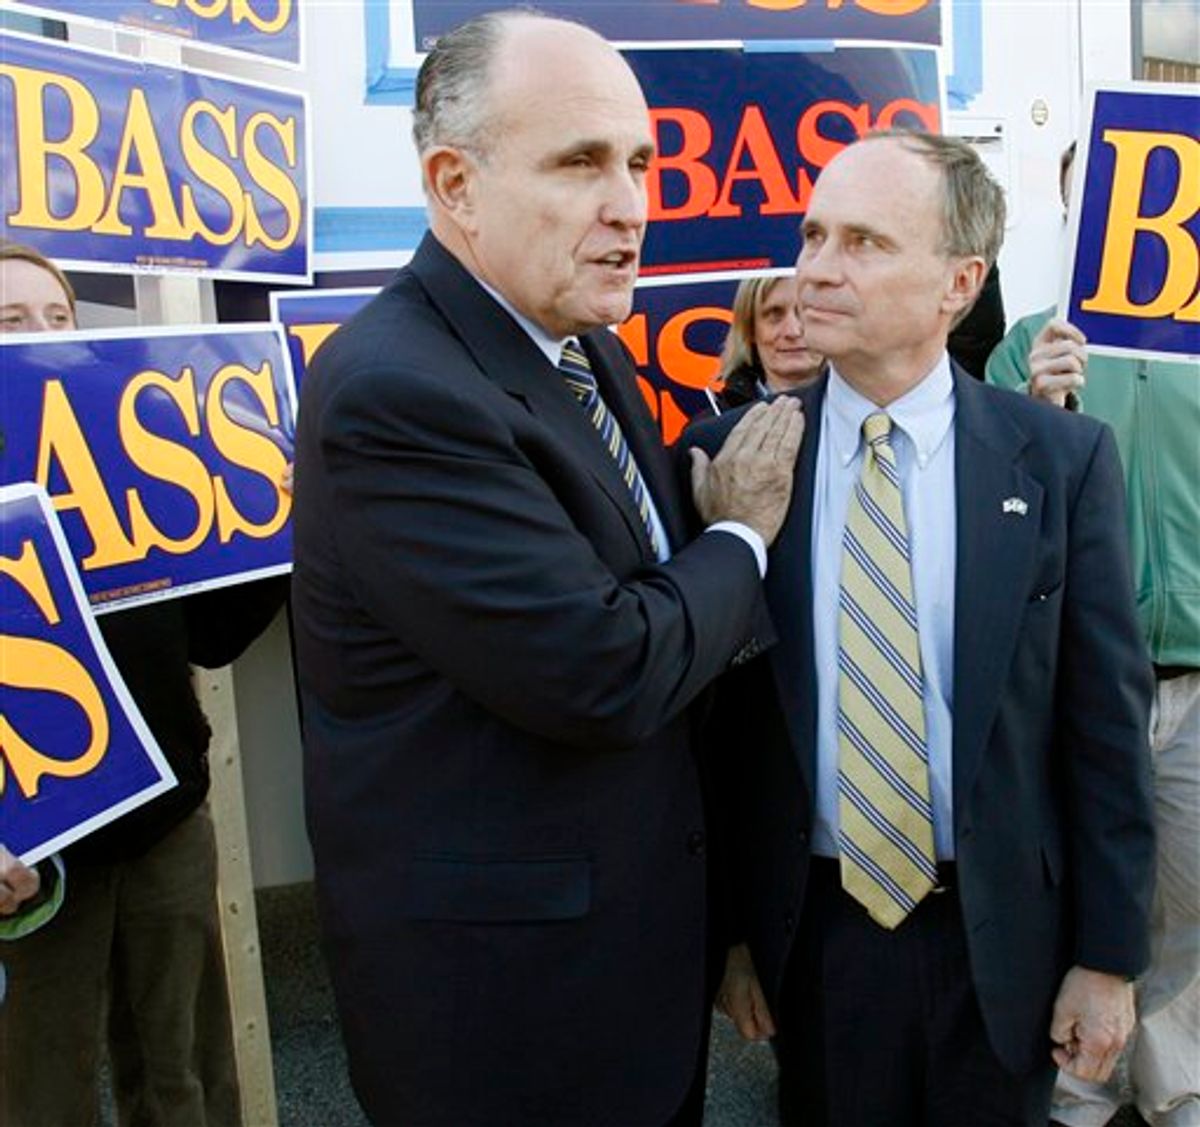 FILE - In this Nov. 3, 2006 file photo, former New York Mayor Rudy Giuliani,left, endorses Rep. Charlie Bass, R-N.H., right, during a special campaign stop at the airport in Nashua, N.H. (AP Photo/Jim Cole, File) (AP)